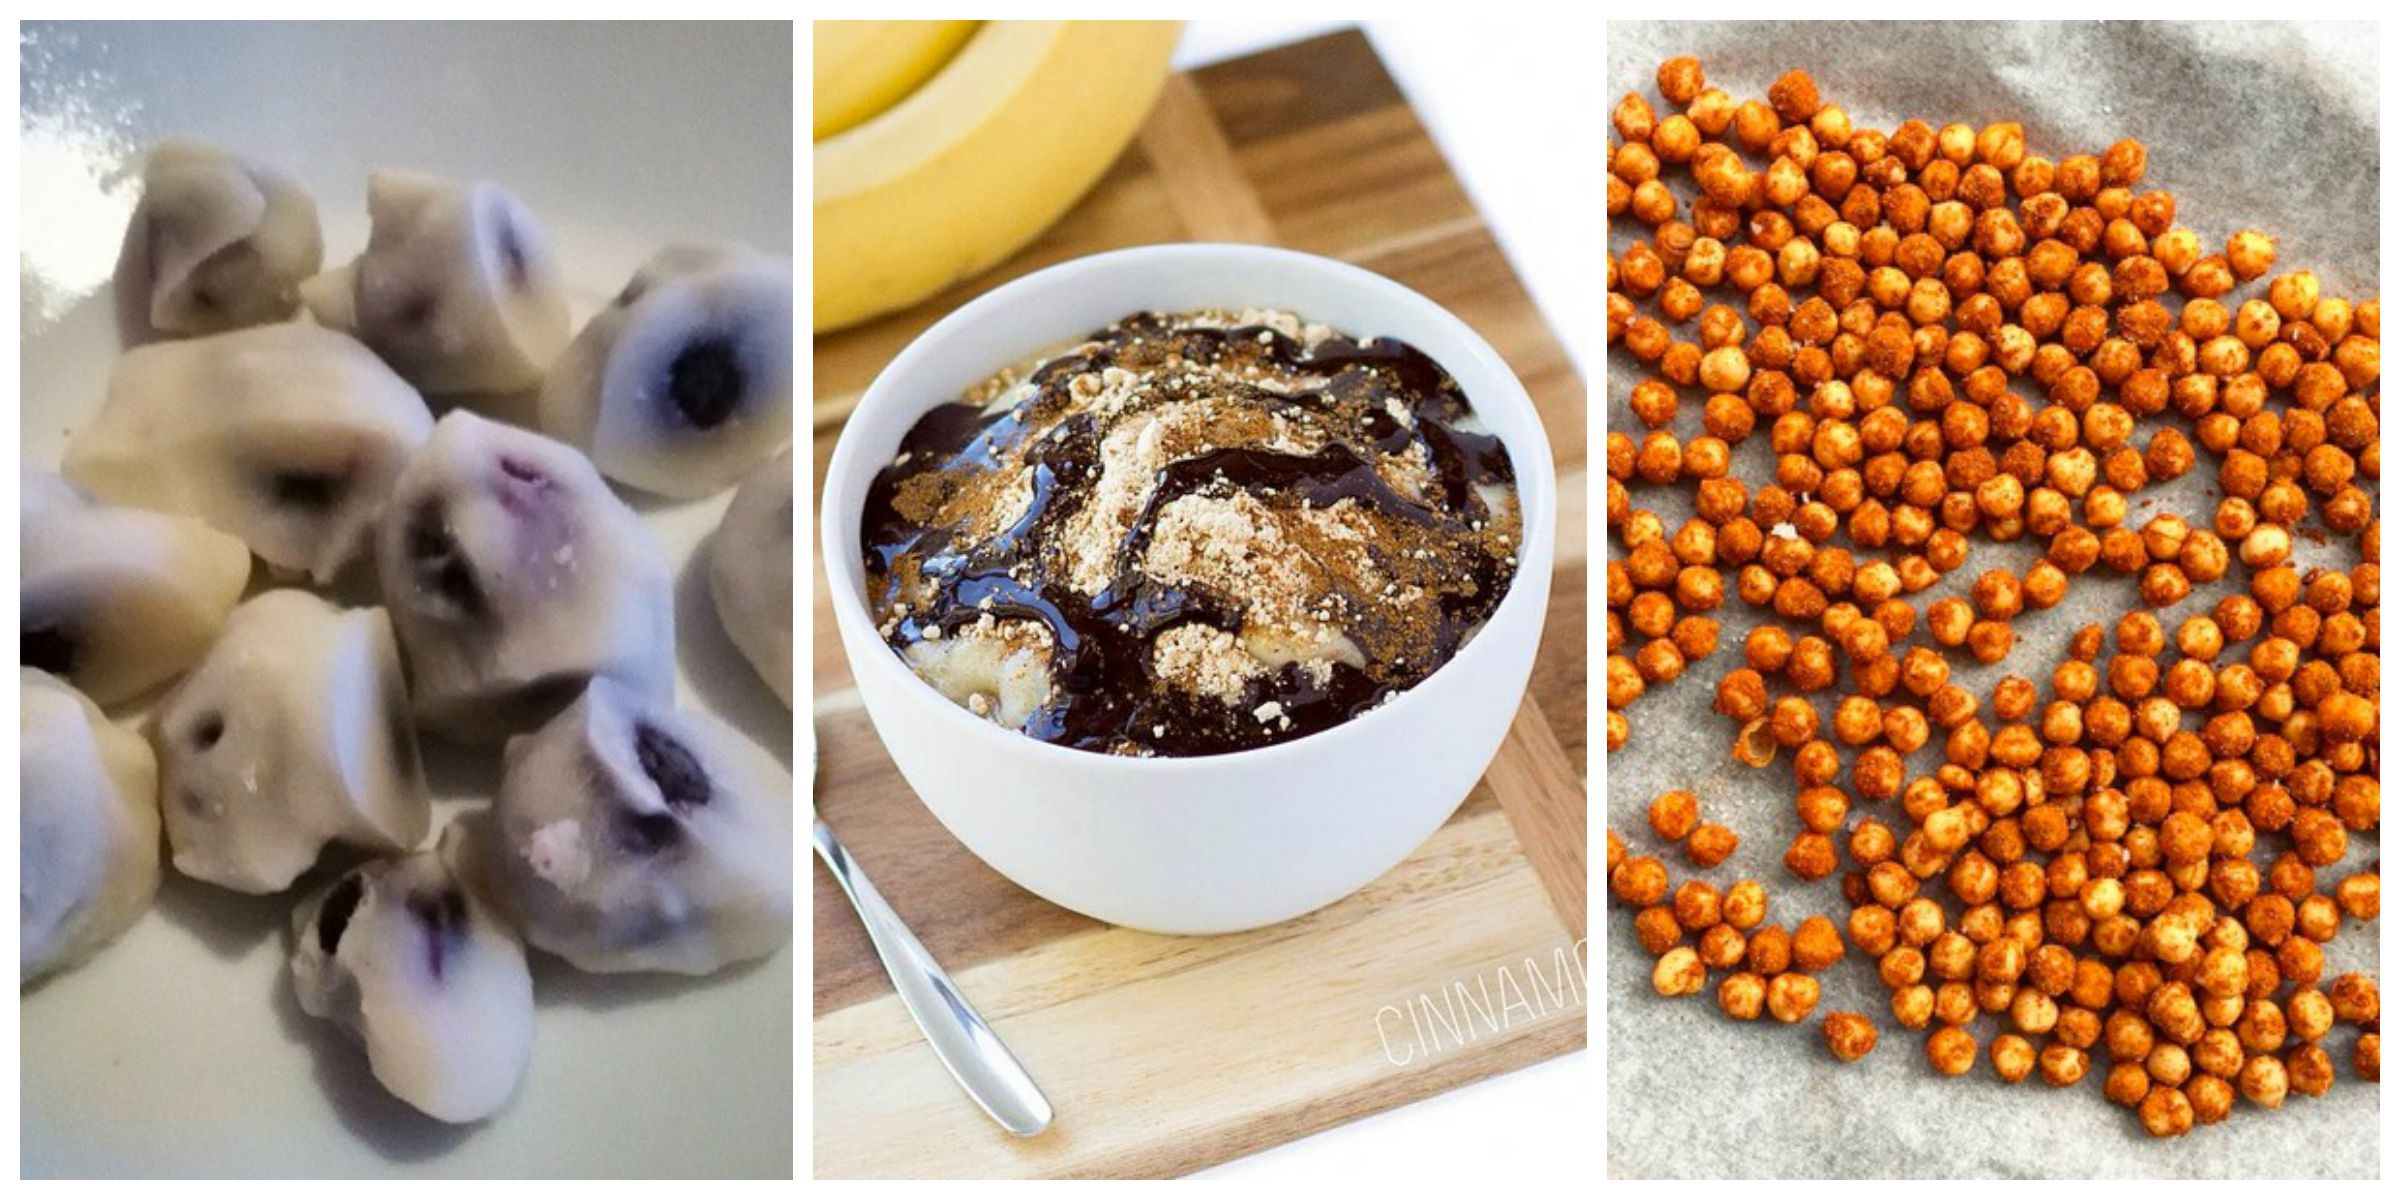 13 lazy girl snacks that require minimal effort and are really